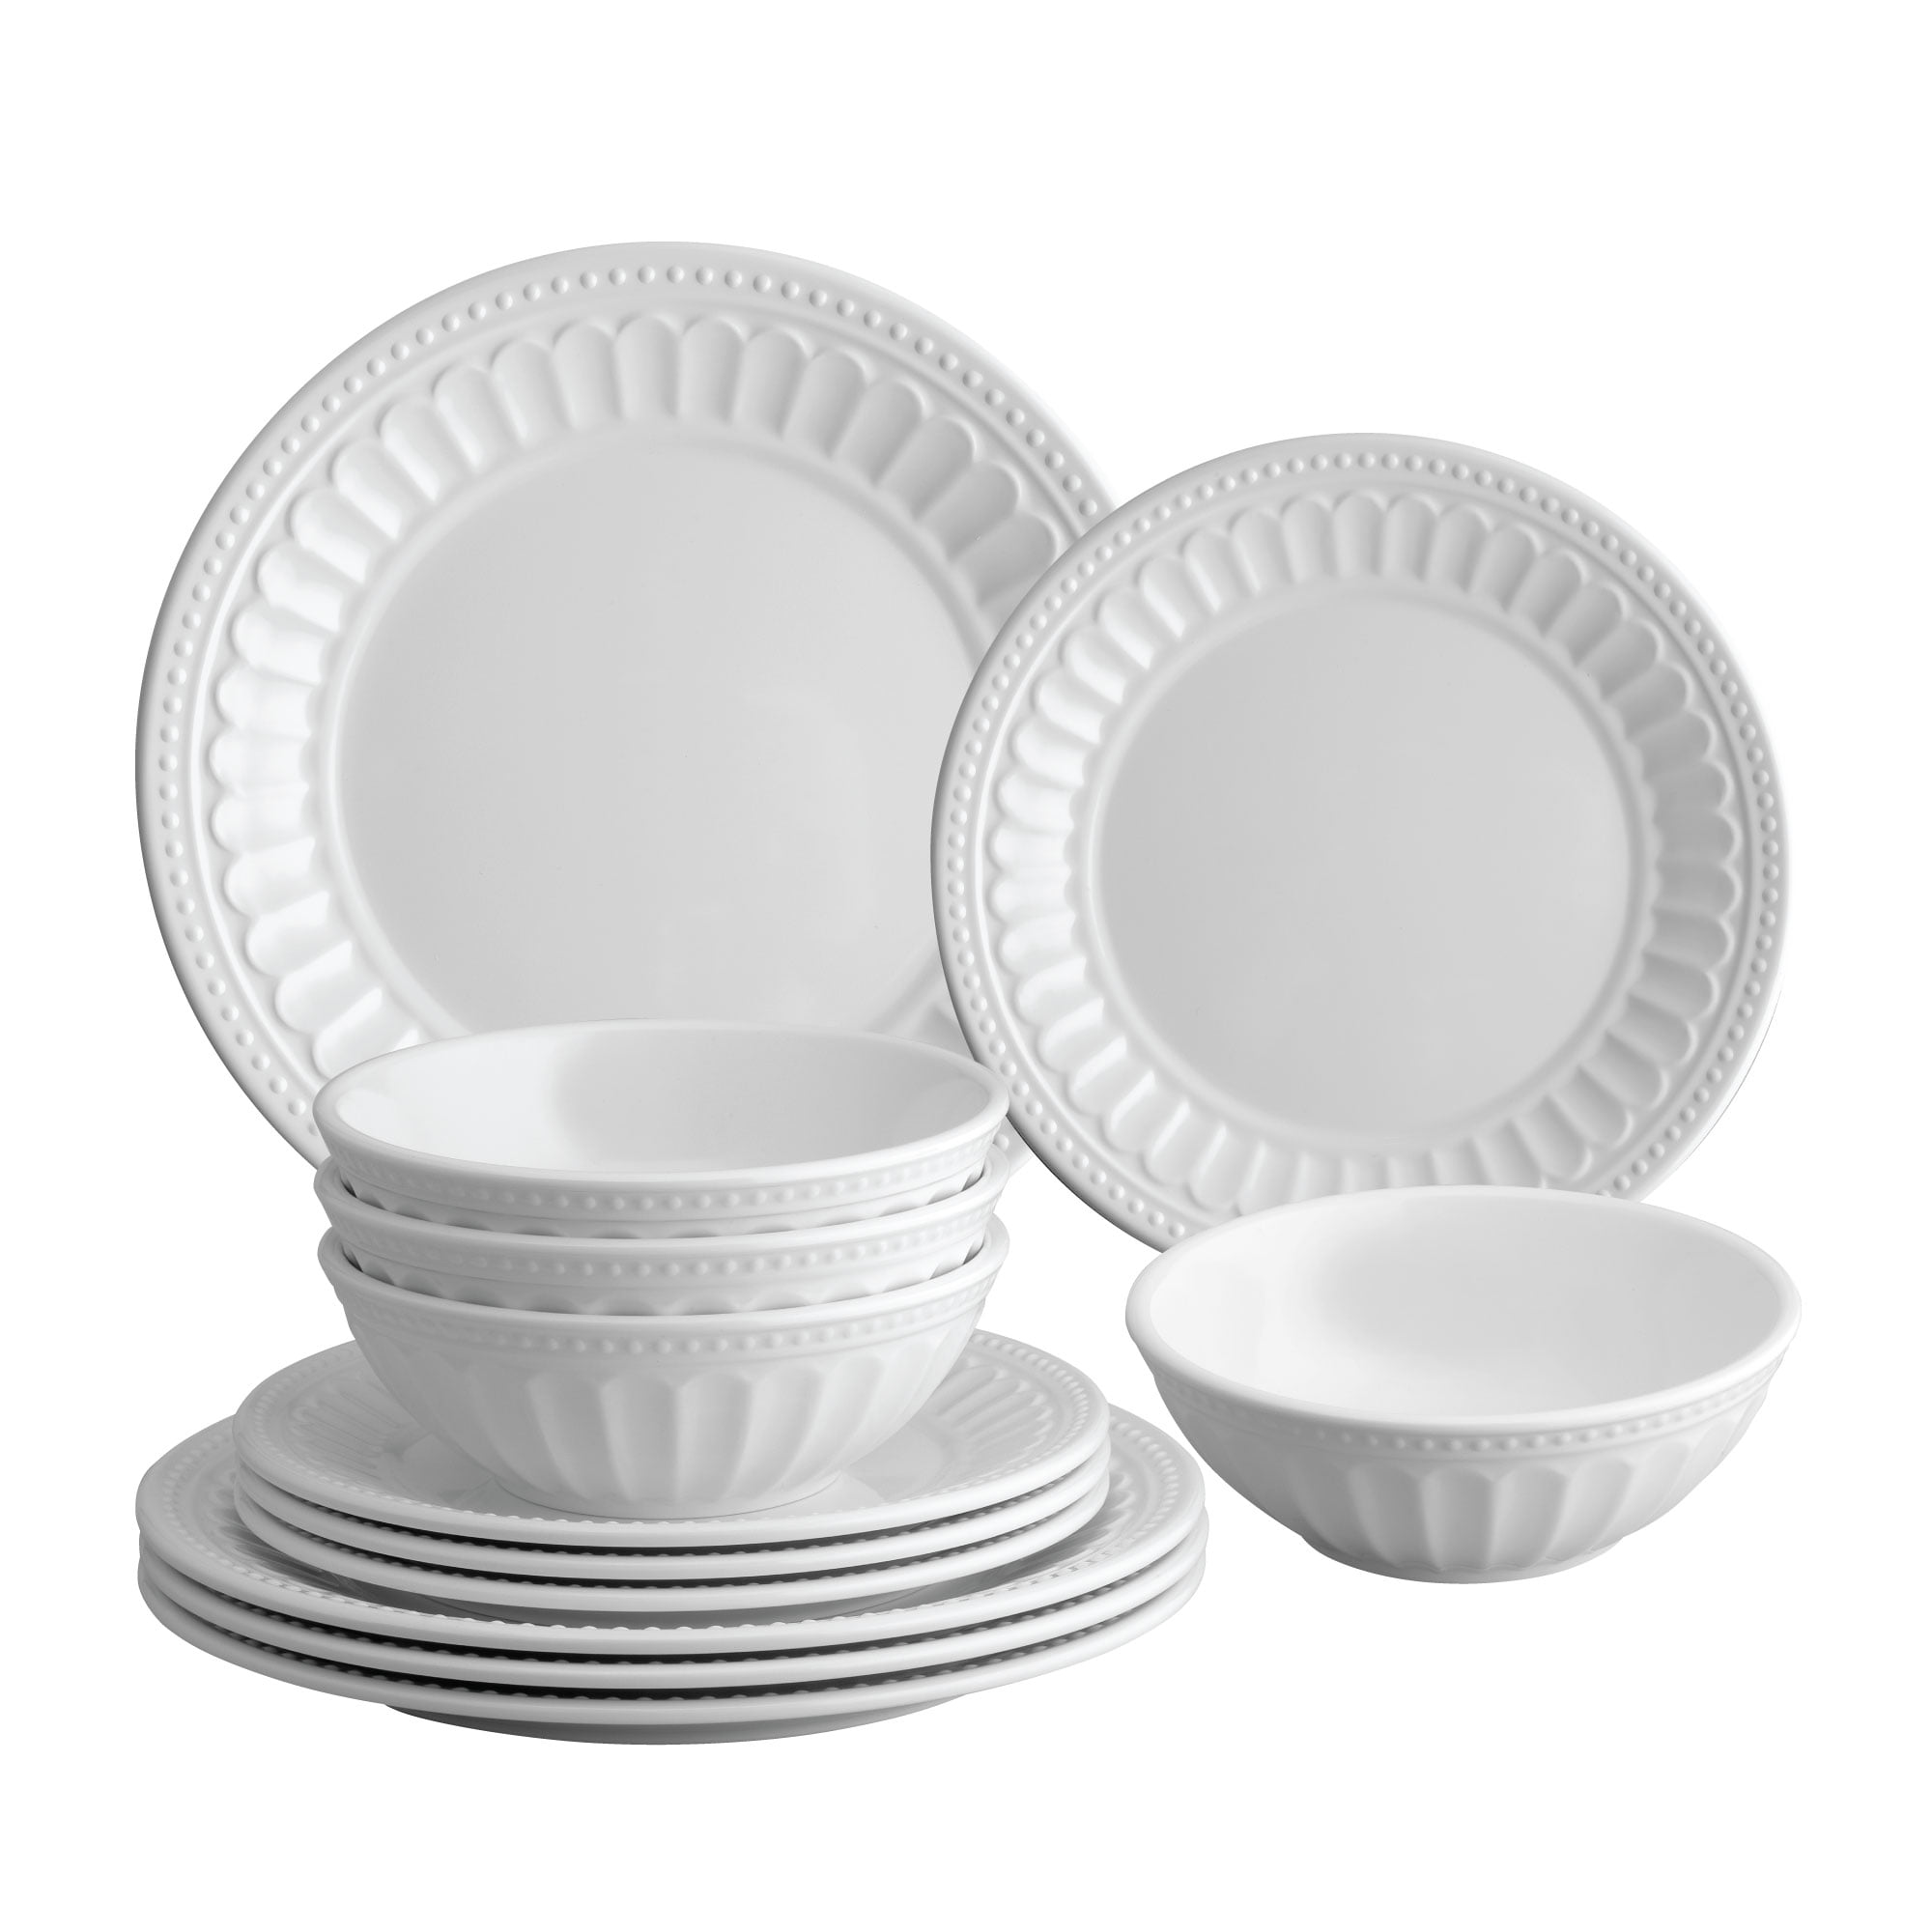 Gourmet Art 12-Piece Beaded Heavyweight and Durable Melamine Dinnerware Set Salad Plates and Bowls Includes Dinner Plates Service for 4 for Indoors Outdoors Use and Everyday Use. 